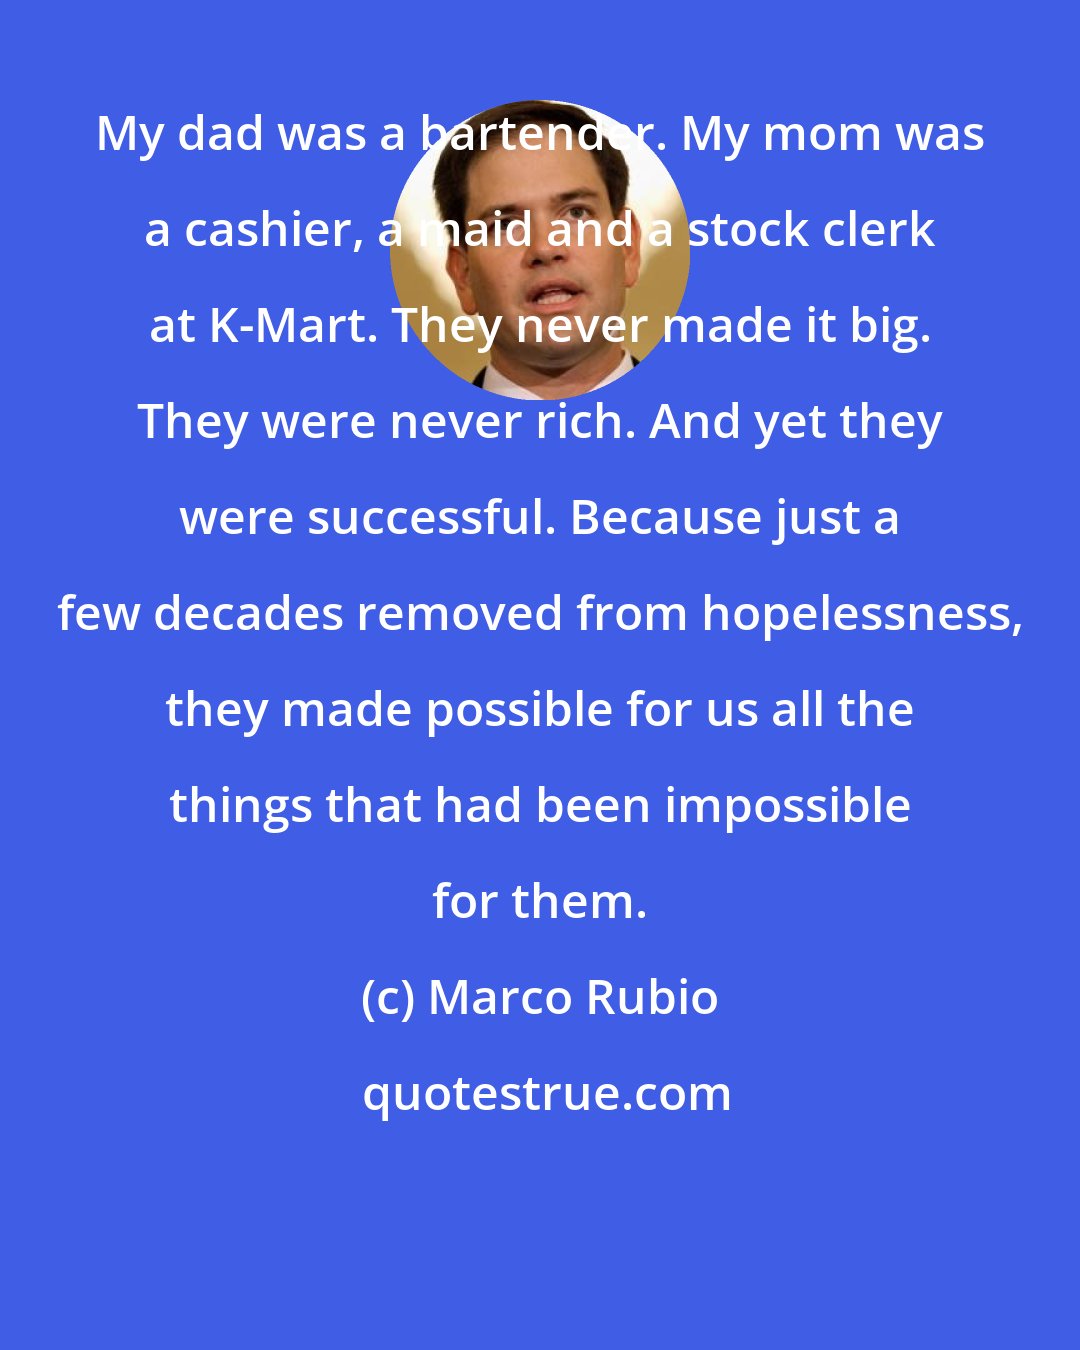 Marco Rubio: My dad was a bartender. My mom was a cashier, a maid and a stock clerk at K-Mart. They never made it big. They were never rich. And yet they were successful. Because just a few decades removed from hopelessness, they made possible for us all the things that had been impossible for them.